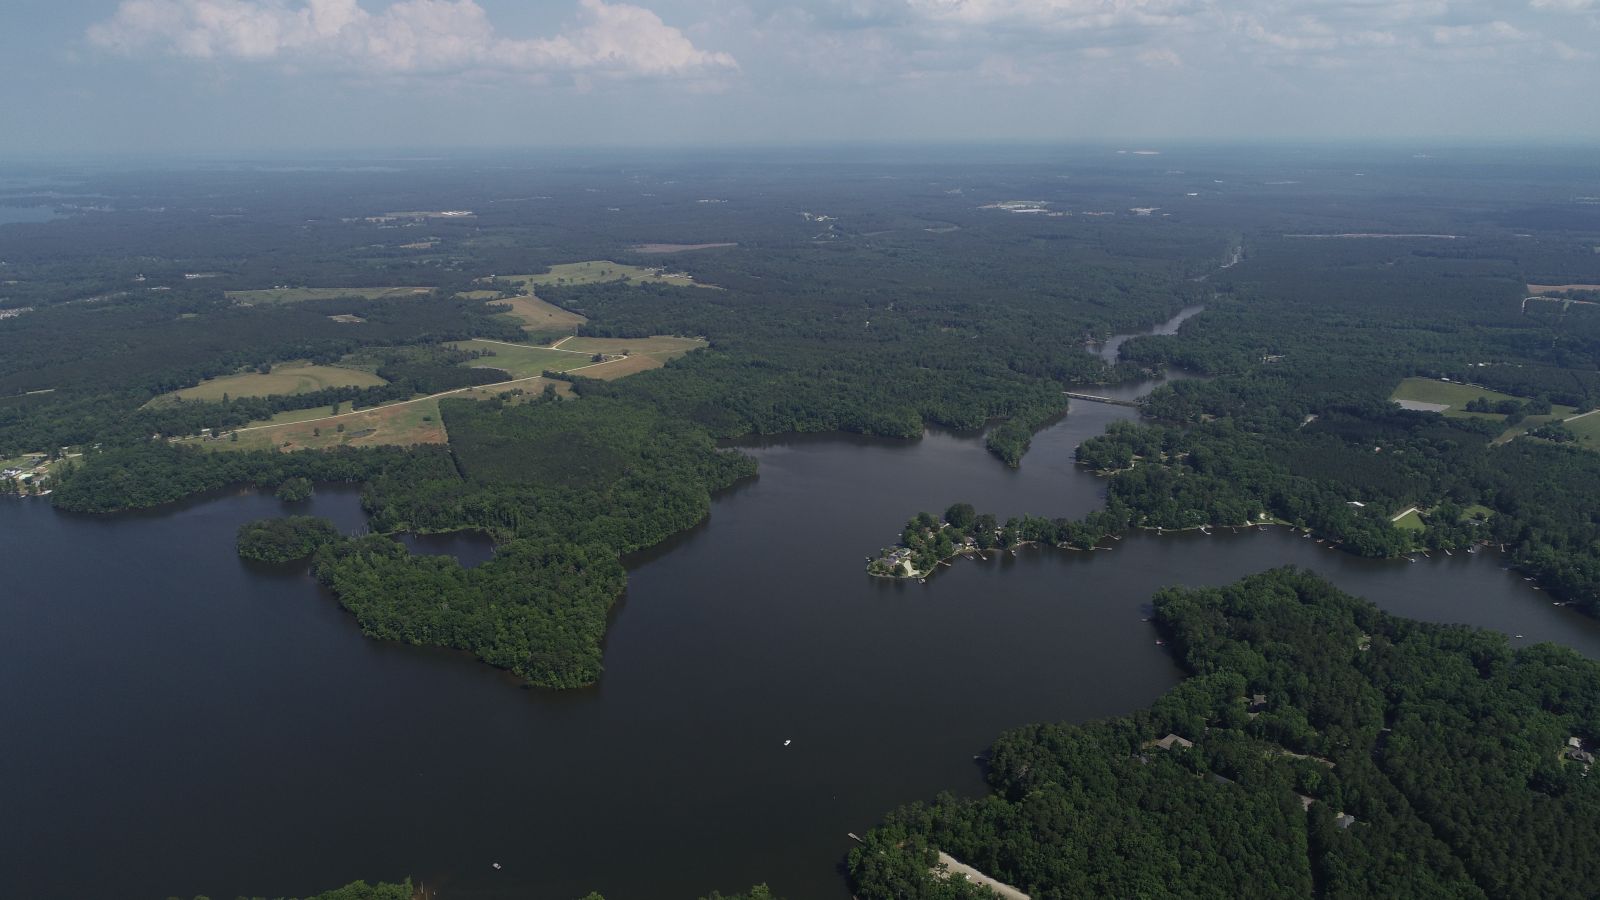 Around 250 people flooded an Oct. 5 sales event for the Palmetto Pointe development planned for Lake Murray in Saluda County, buying 86 out of the 98 lots available. (Photo/American Land Holdings)